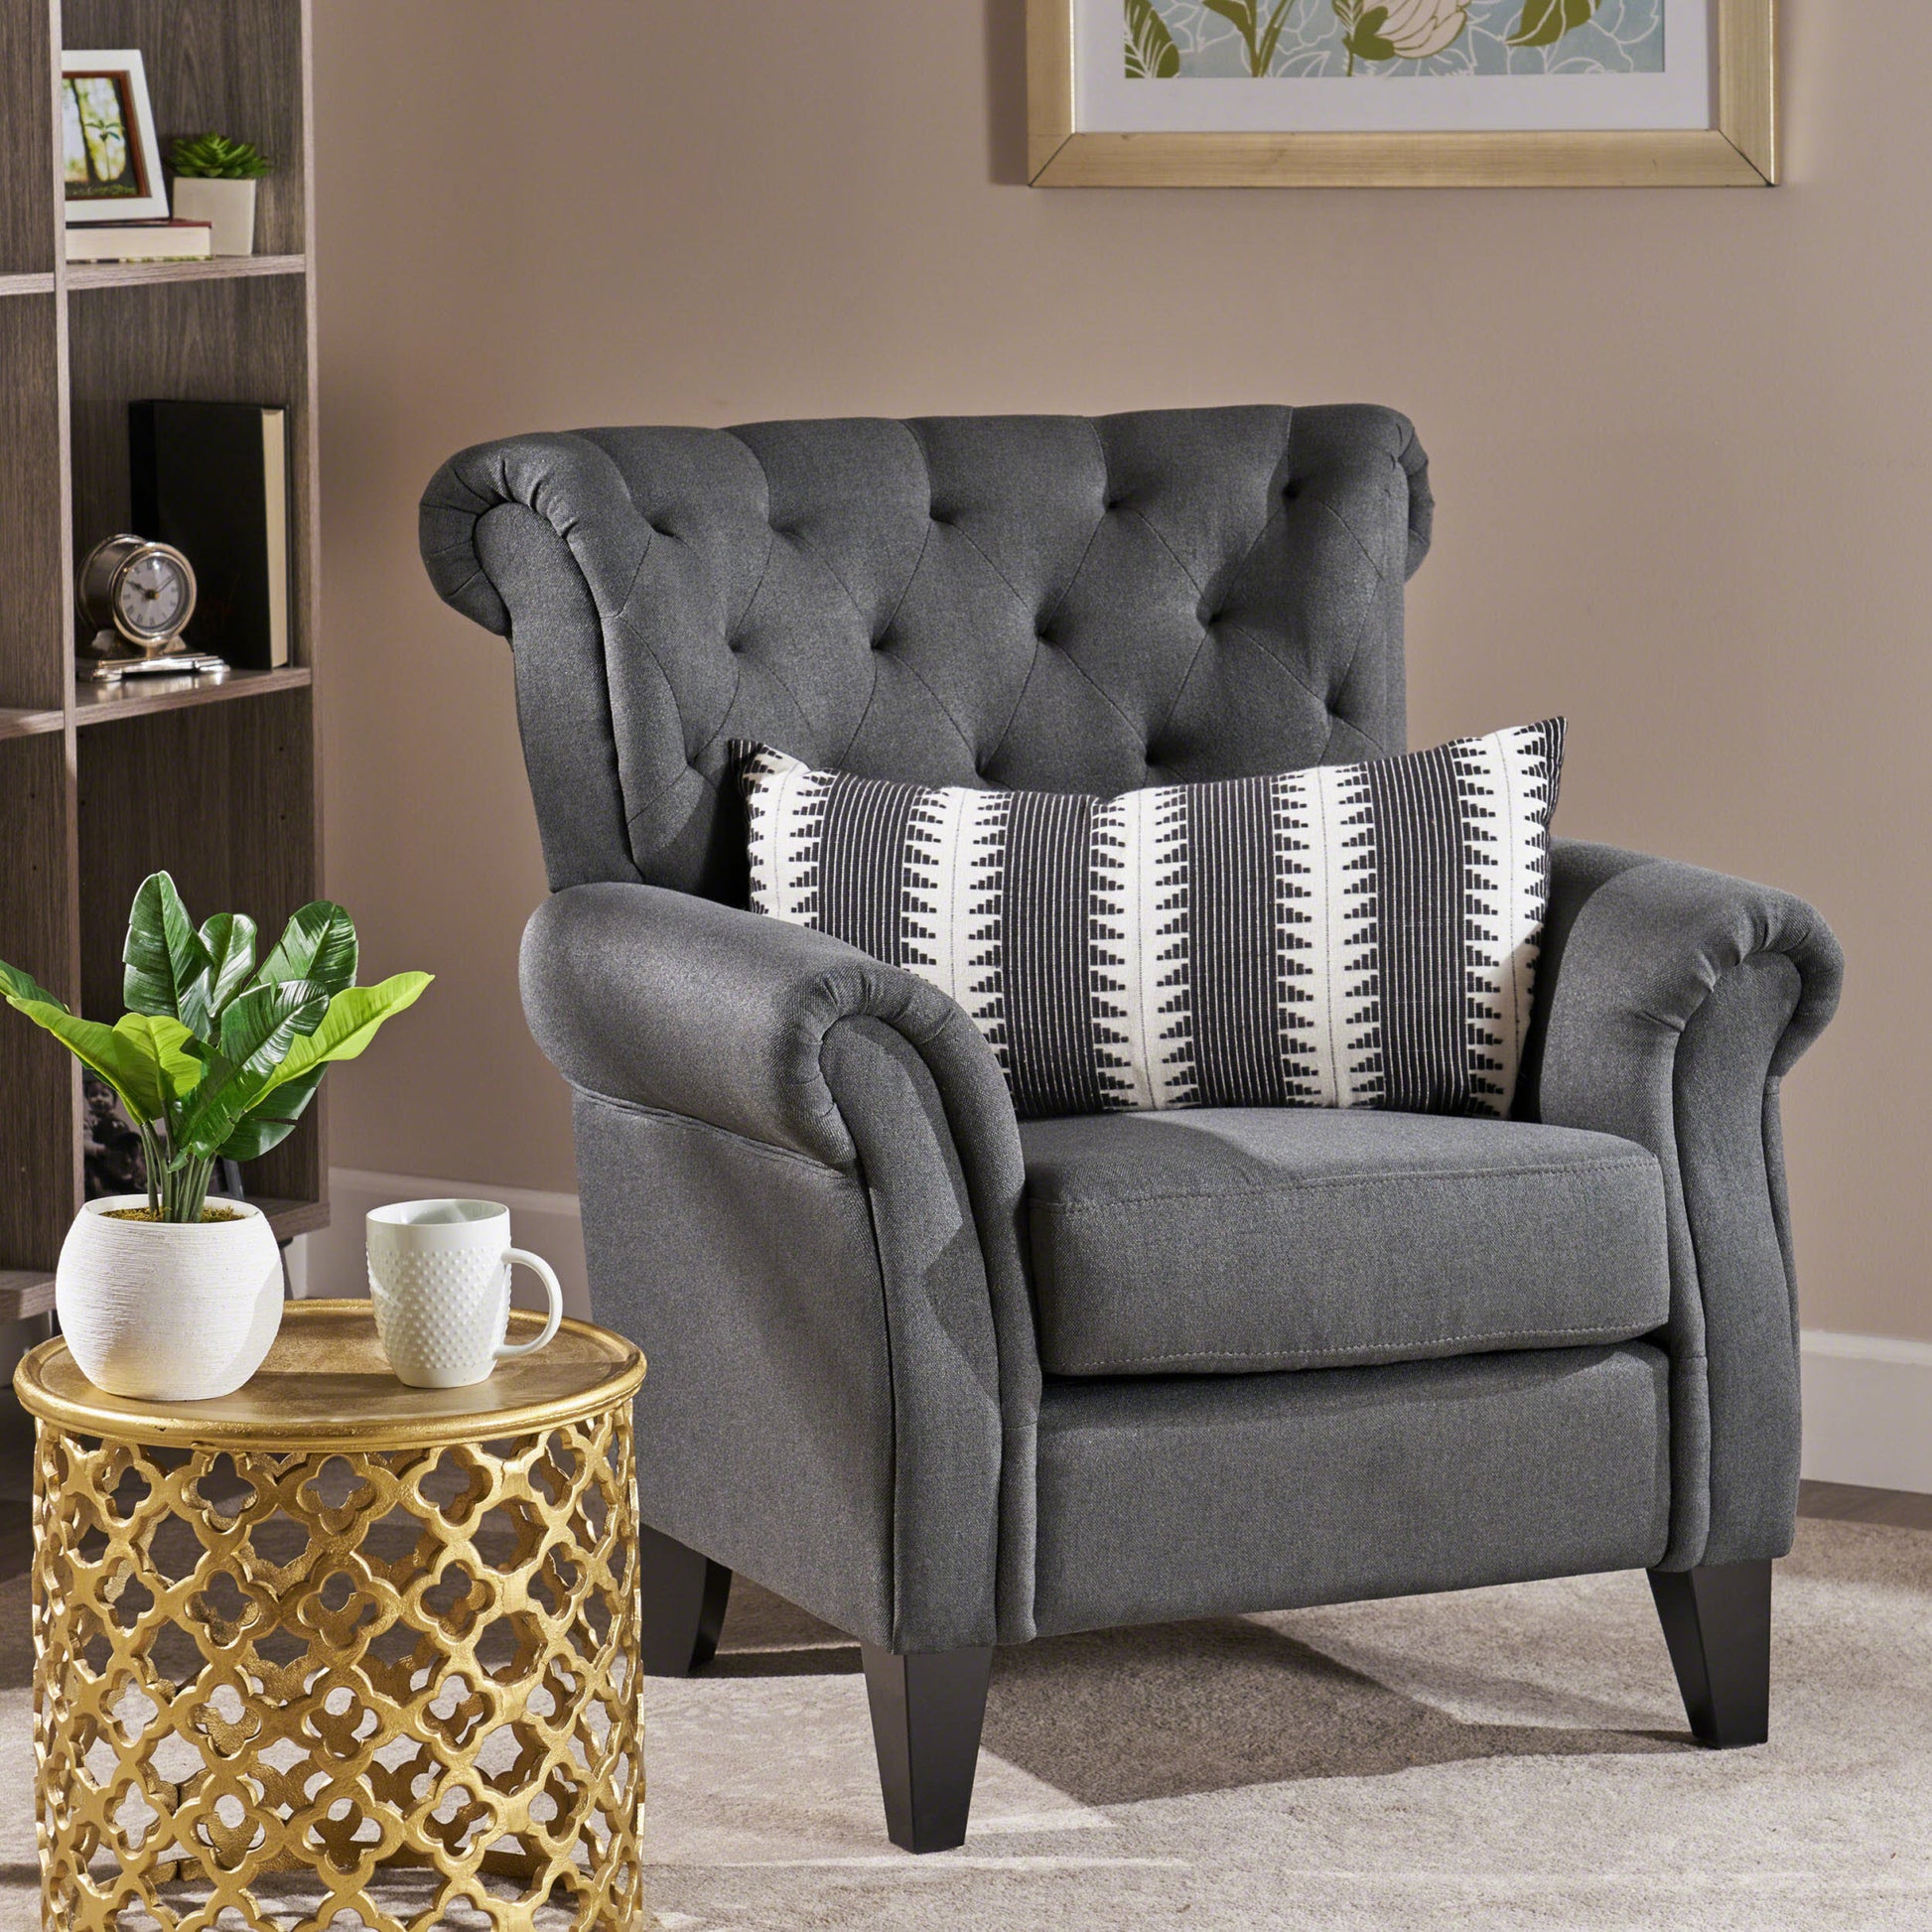 Mirod Comfy Accent Chair with Tufted Backrest, Bedroom dark gray-fabric